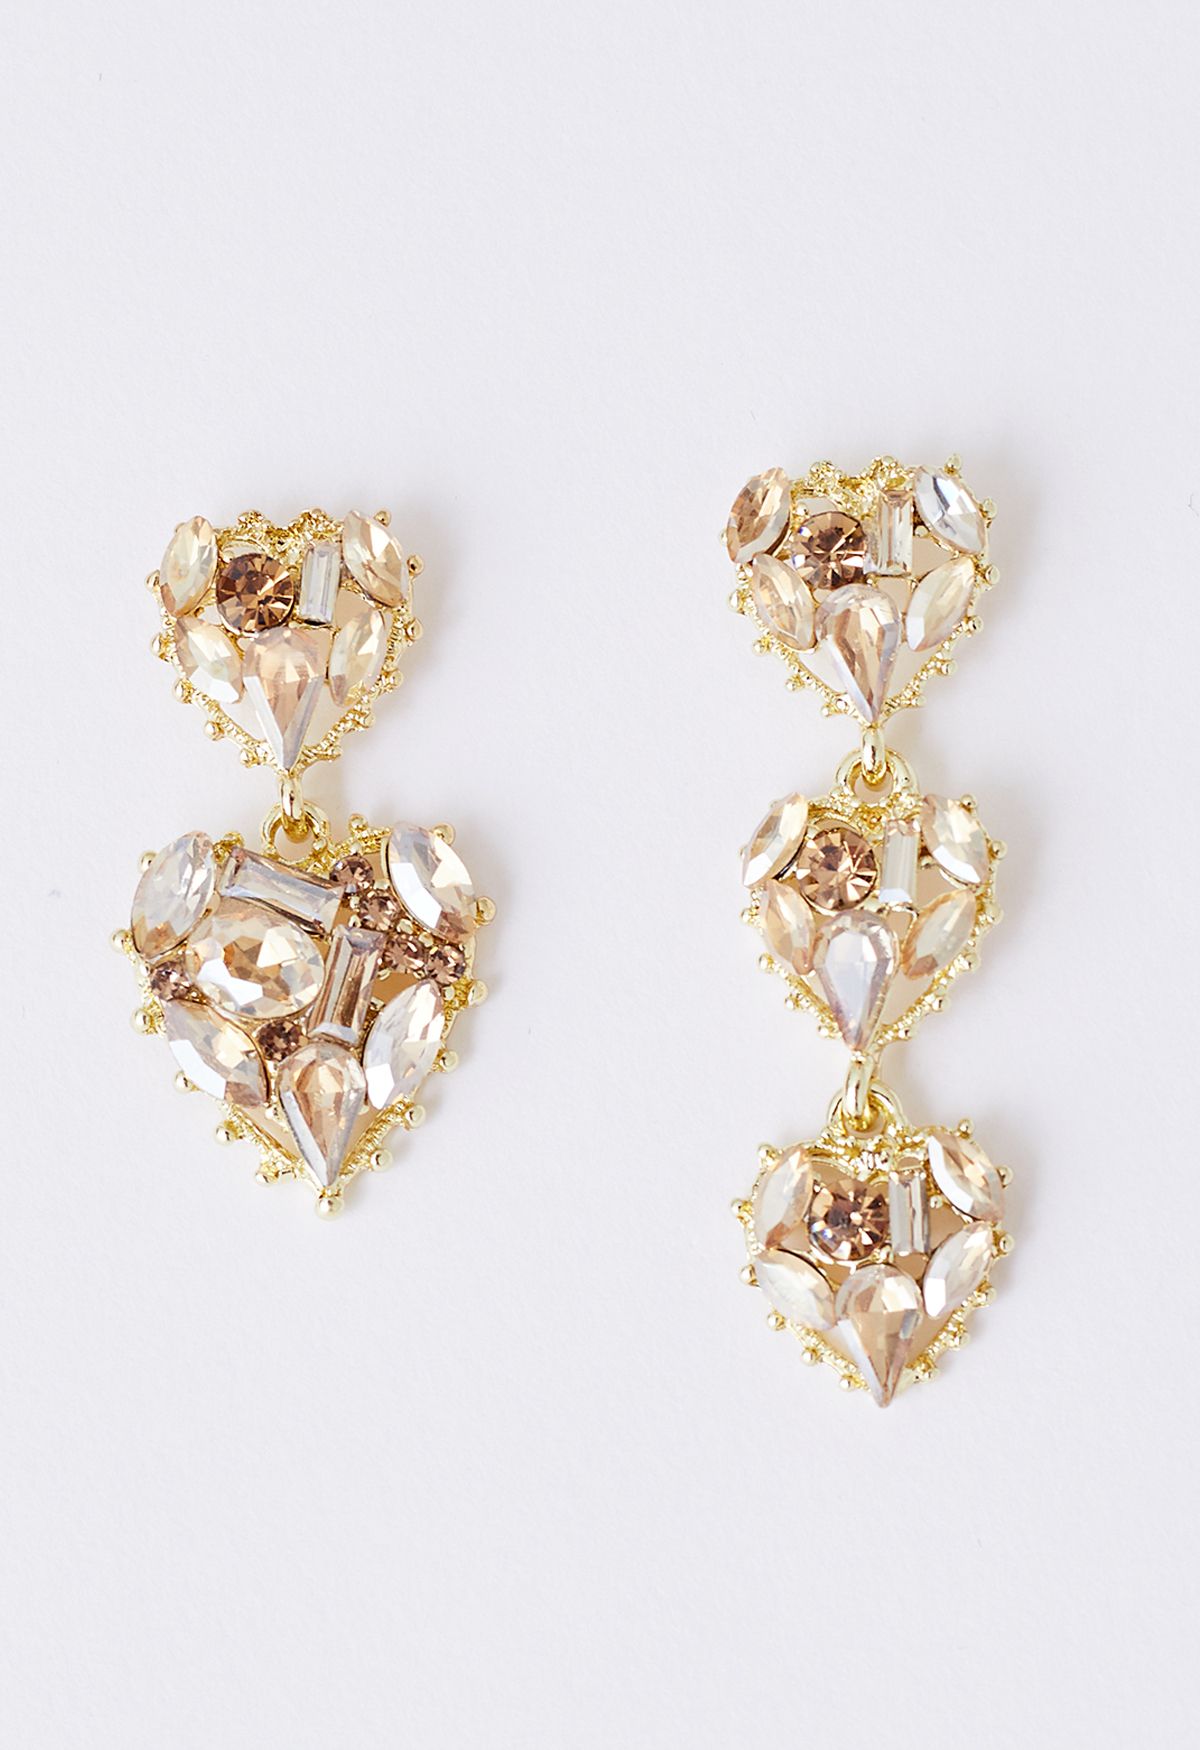 Asymmetric Golden Heart Crystal Earrings - Retro, Indie and Unique Fashion